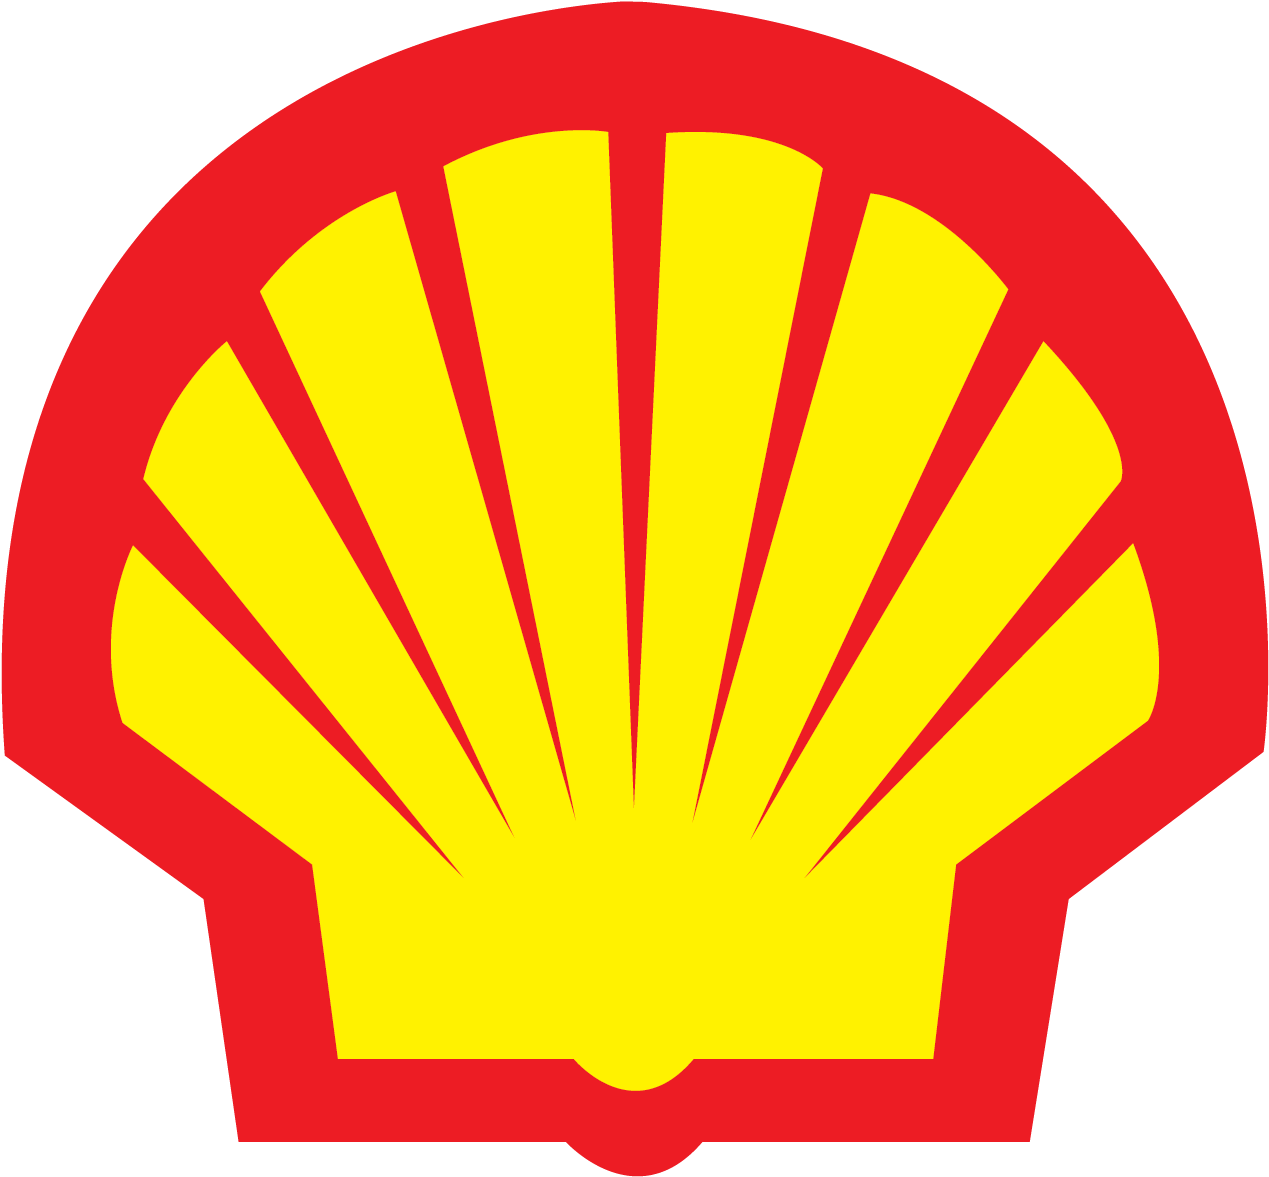 Bob Stivers Shell Stations In San Diego - Shell Company Of Thailand (1320x1245)